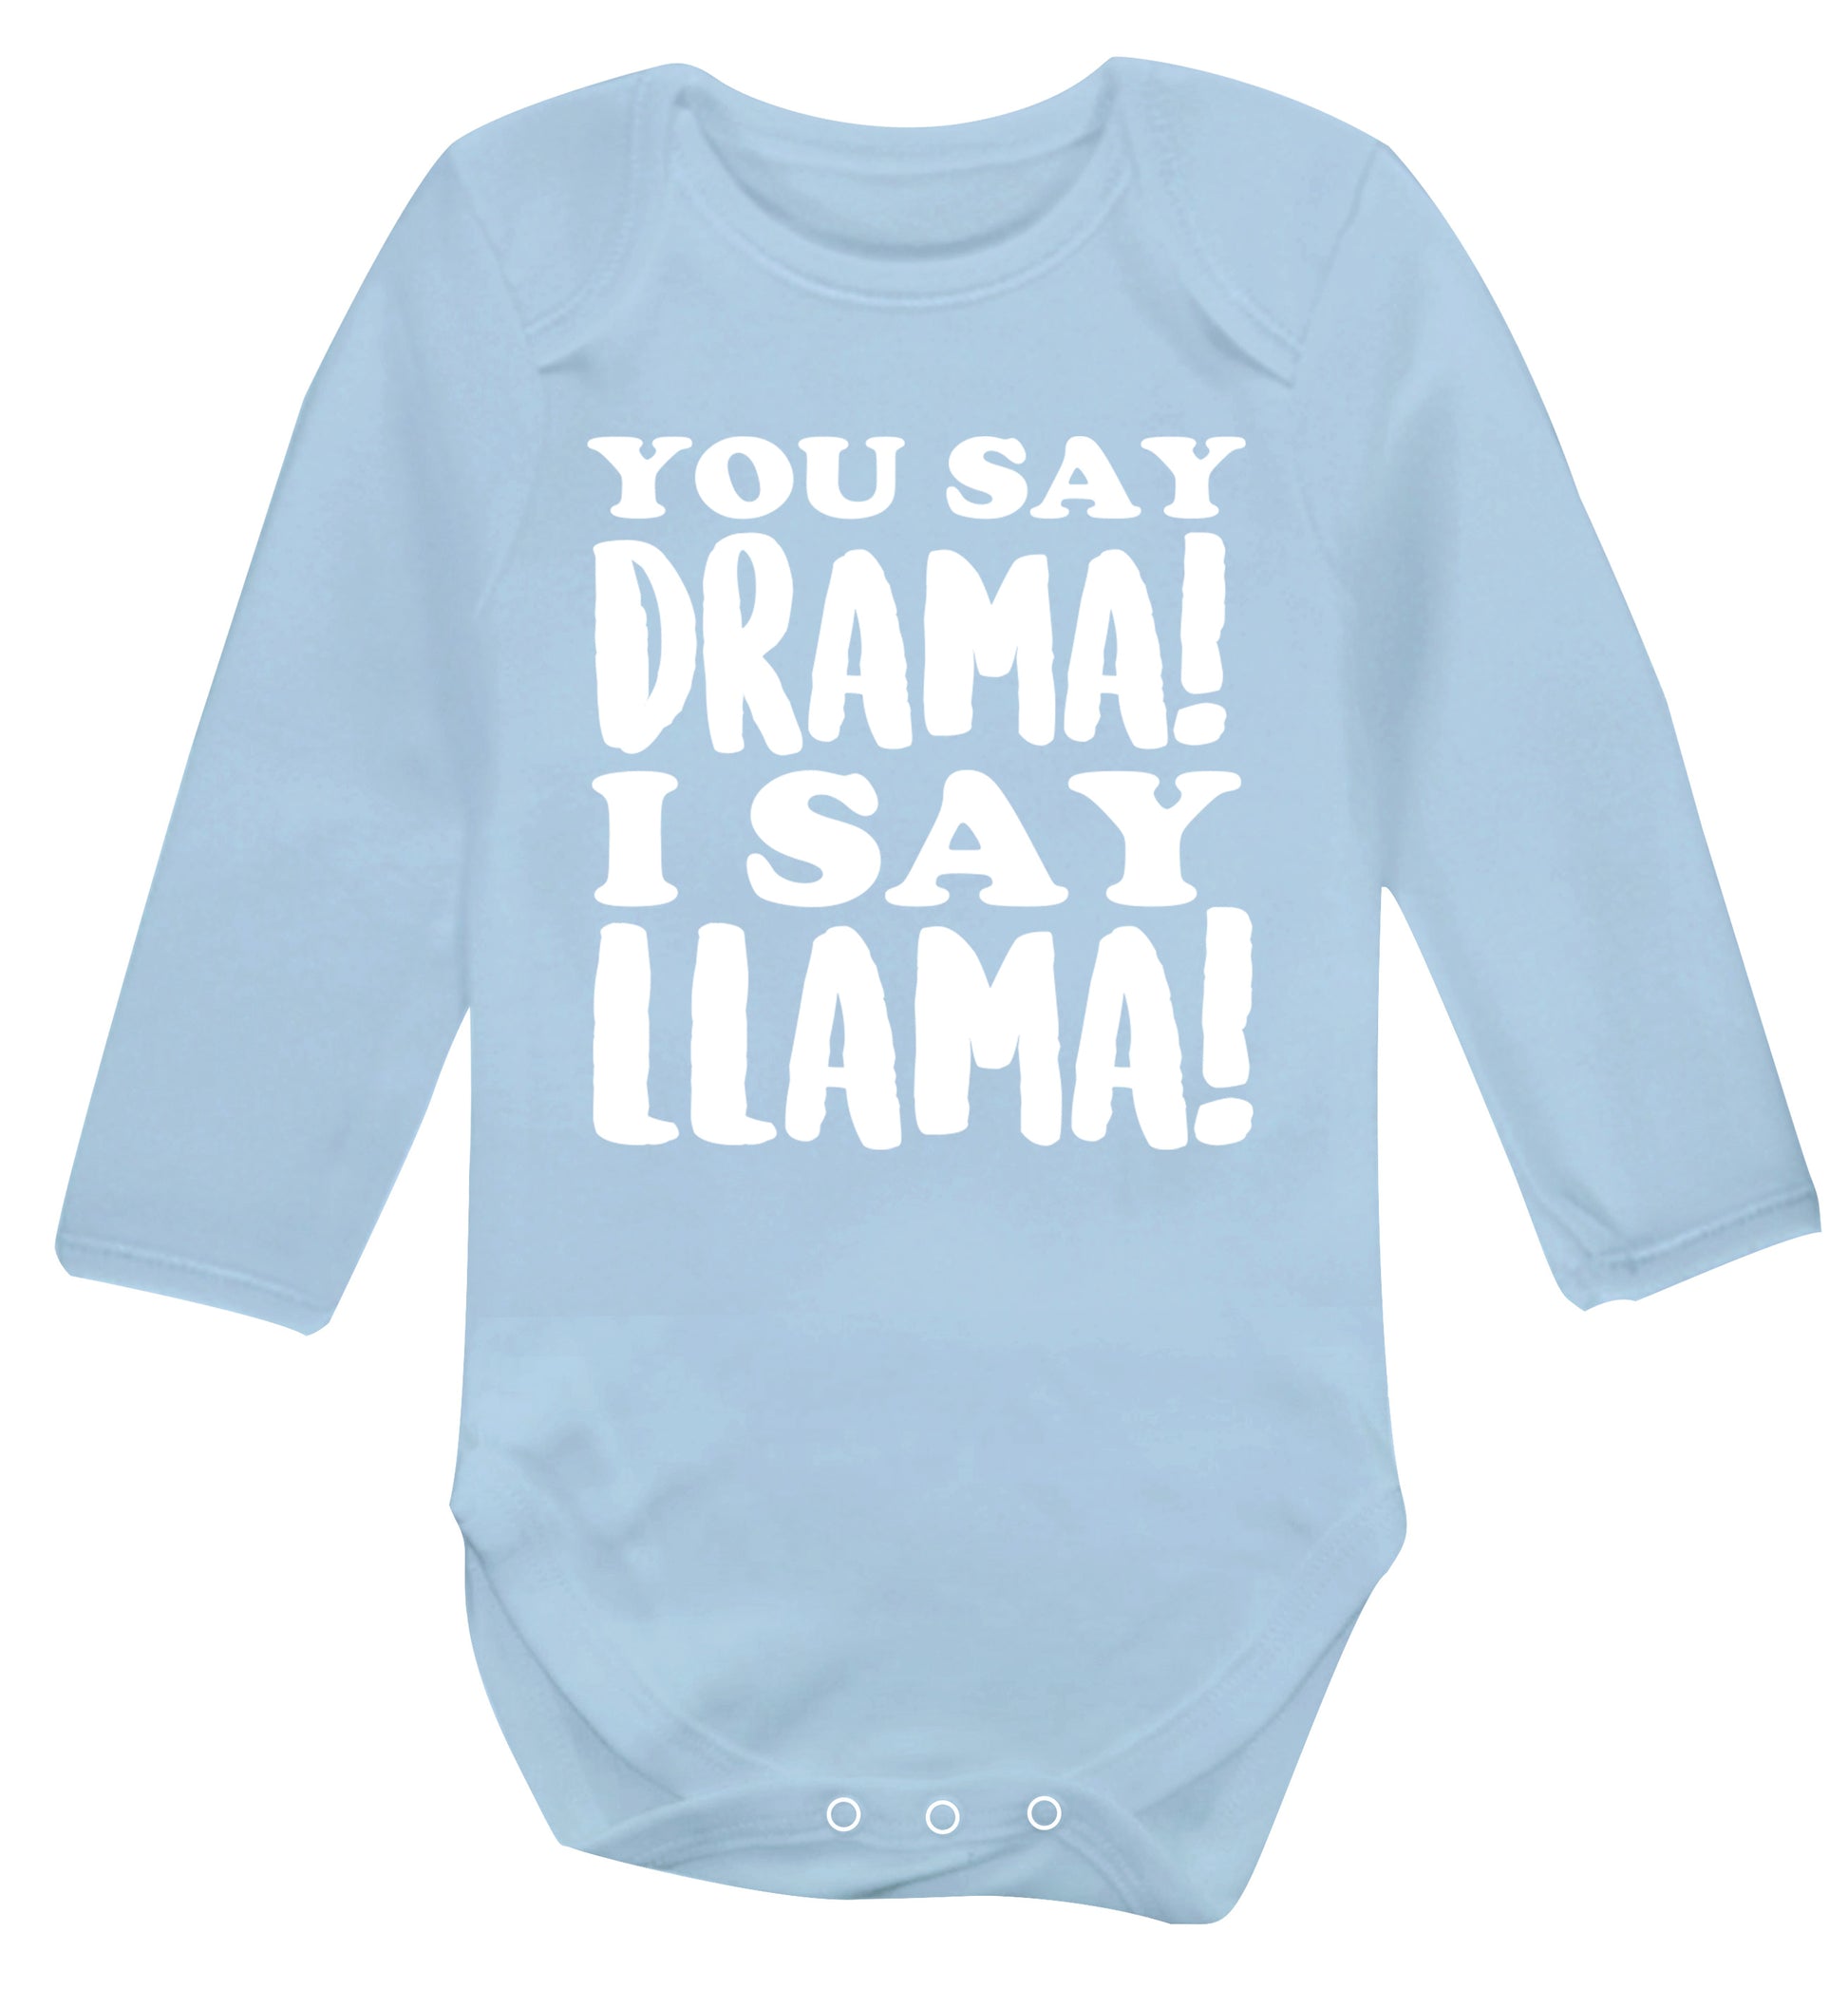 You say drama I say llama! Baby Vest long sleeved pale blue 6-12 months